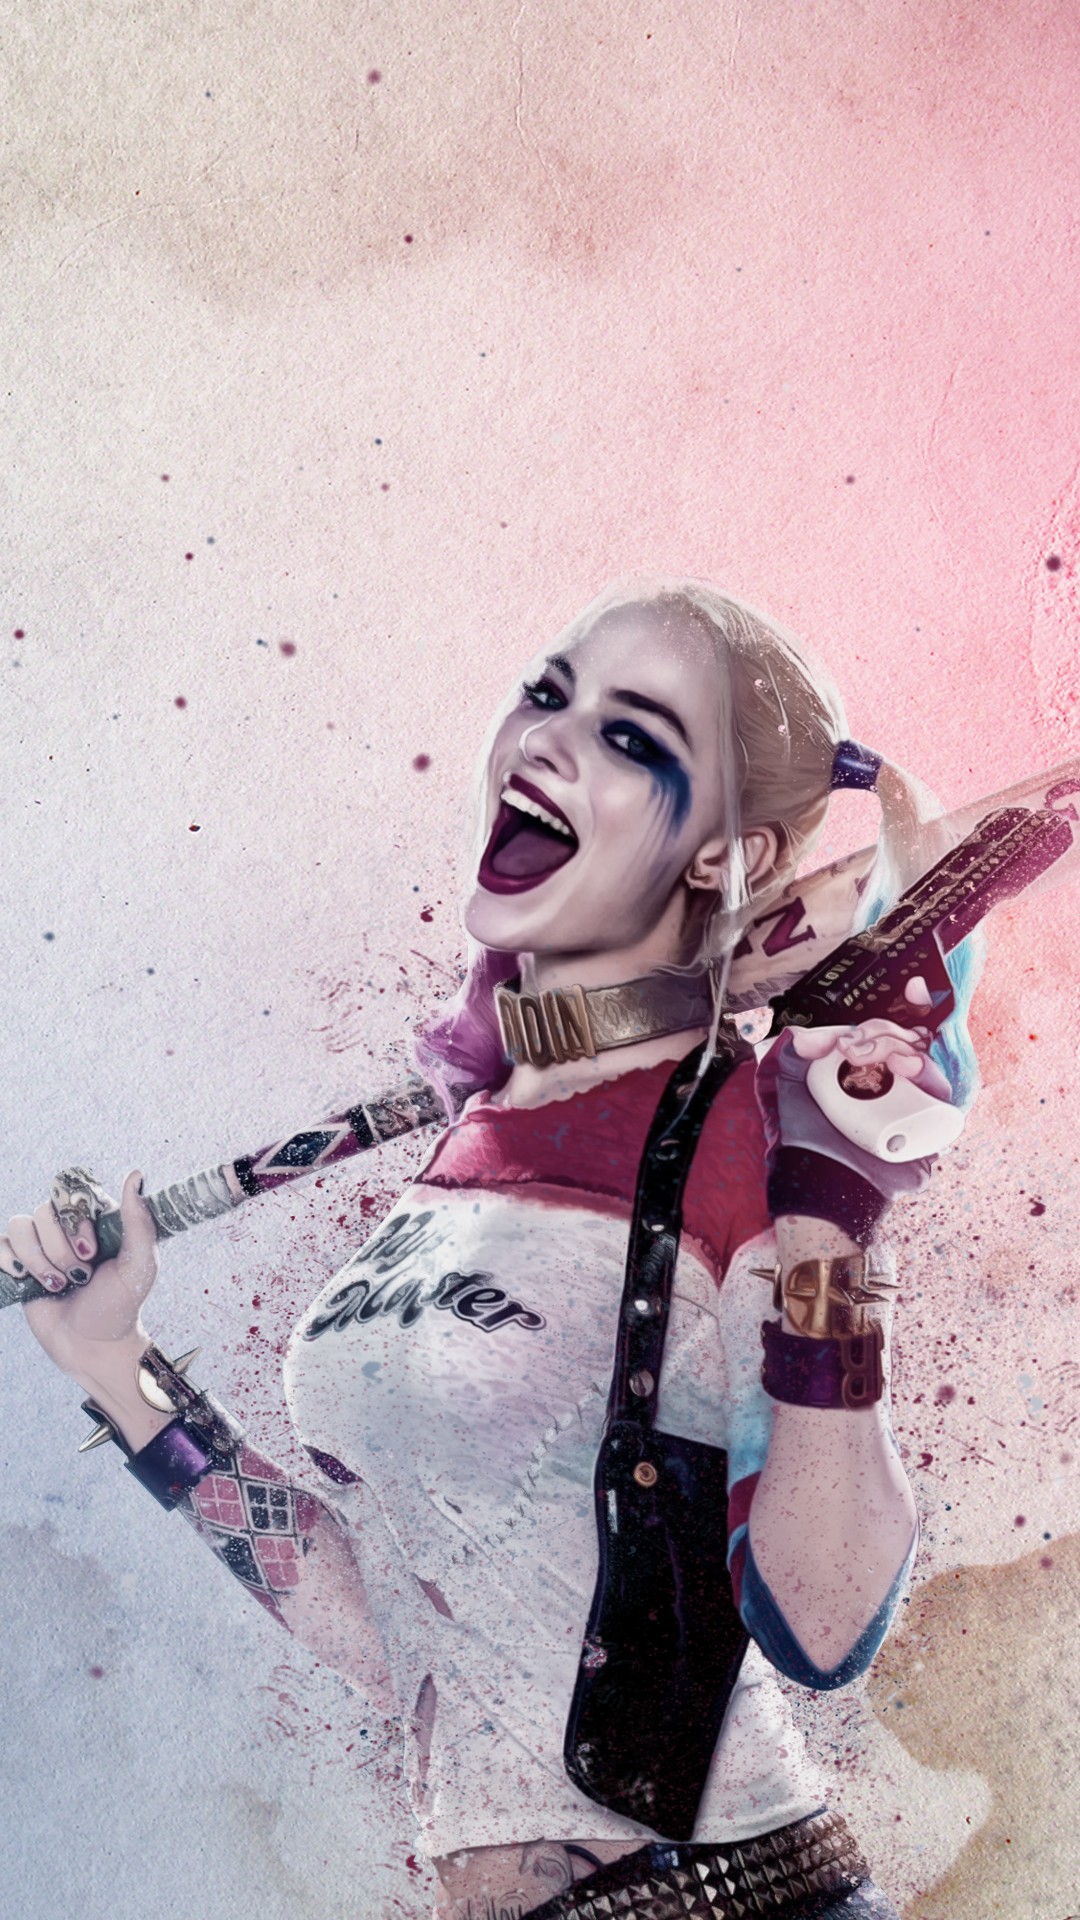 Harley Quinn Movie iPhone 6 Wallpaper with resolution 1080X1920 pixel. You can use this wallpaper as background for your desktop Computer Screensavers, Android or iPhone smartphones